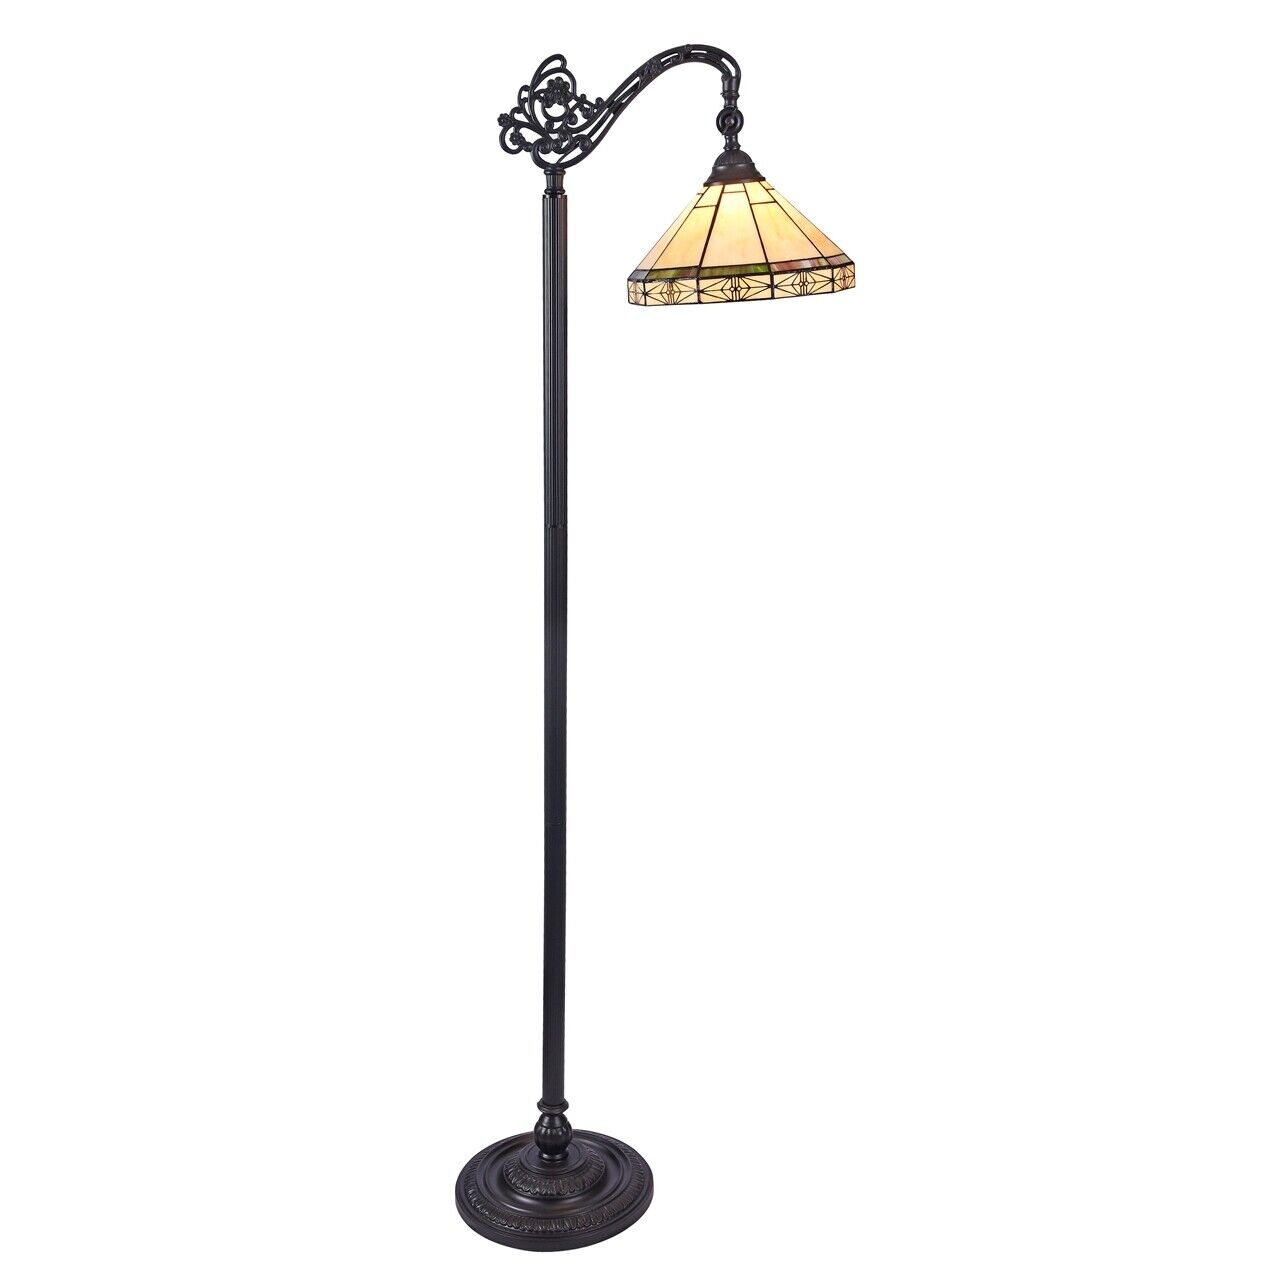 62.2" Antique Style Stained Glass Mission Reading Floor Lamp